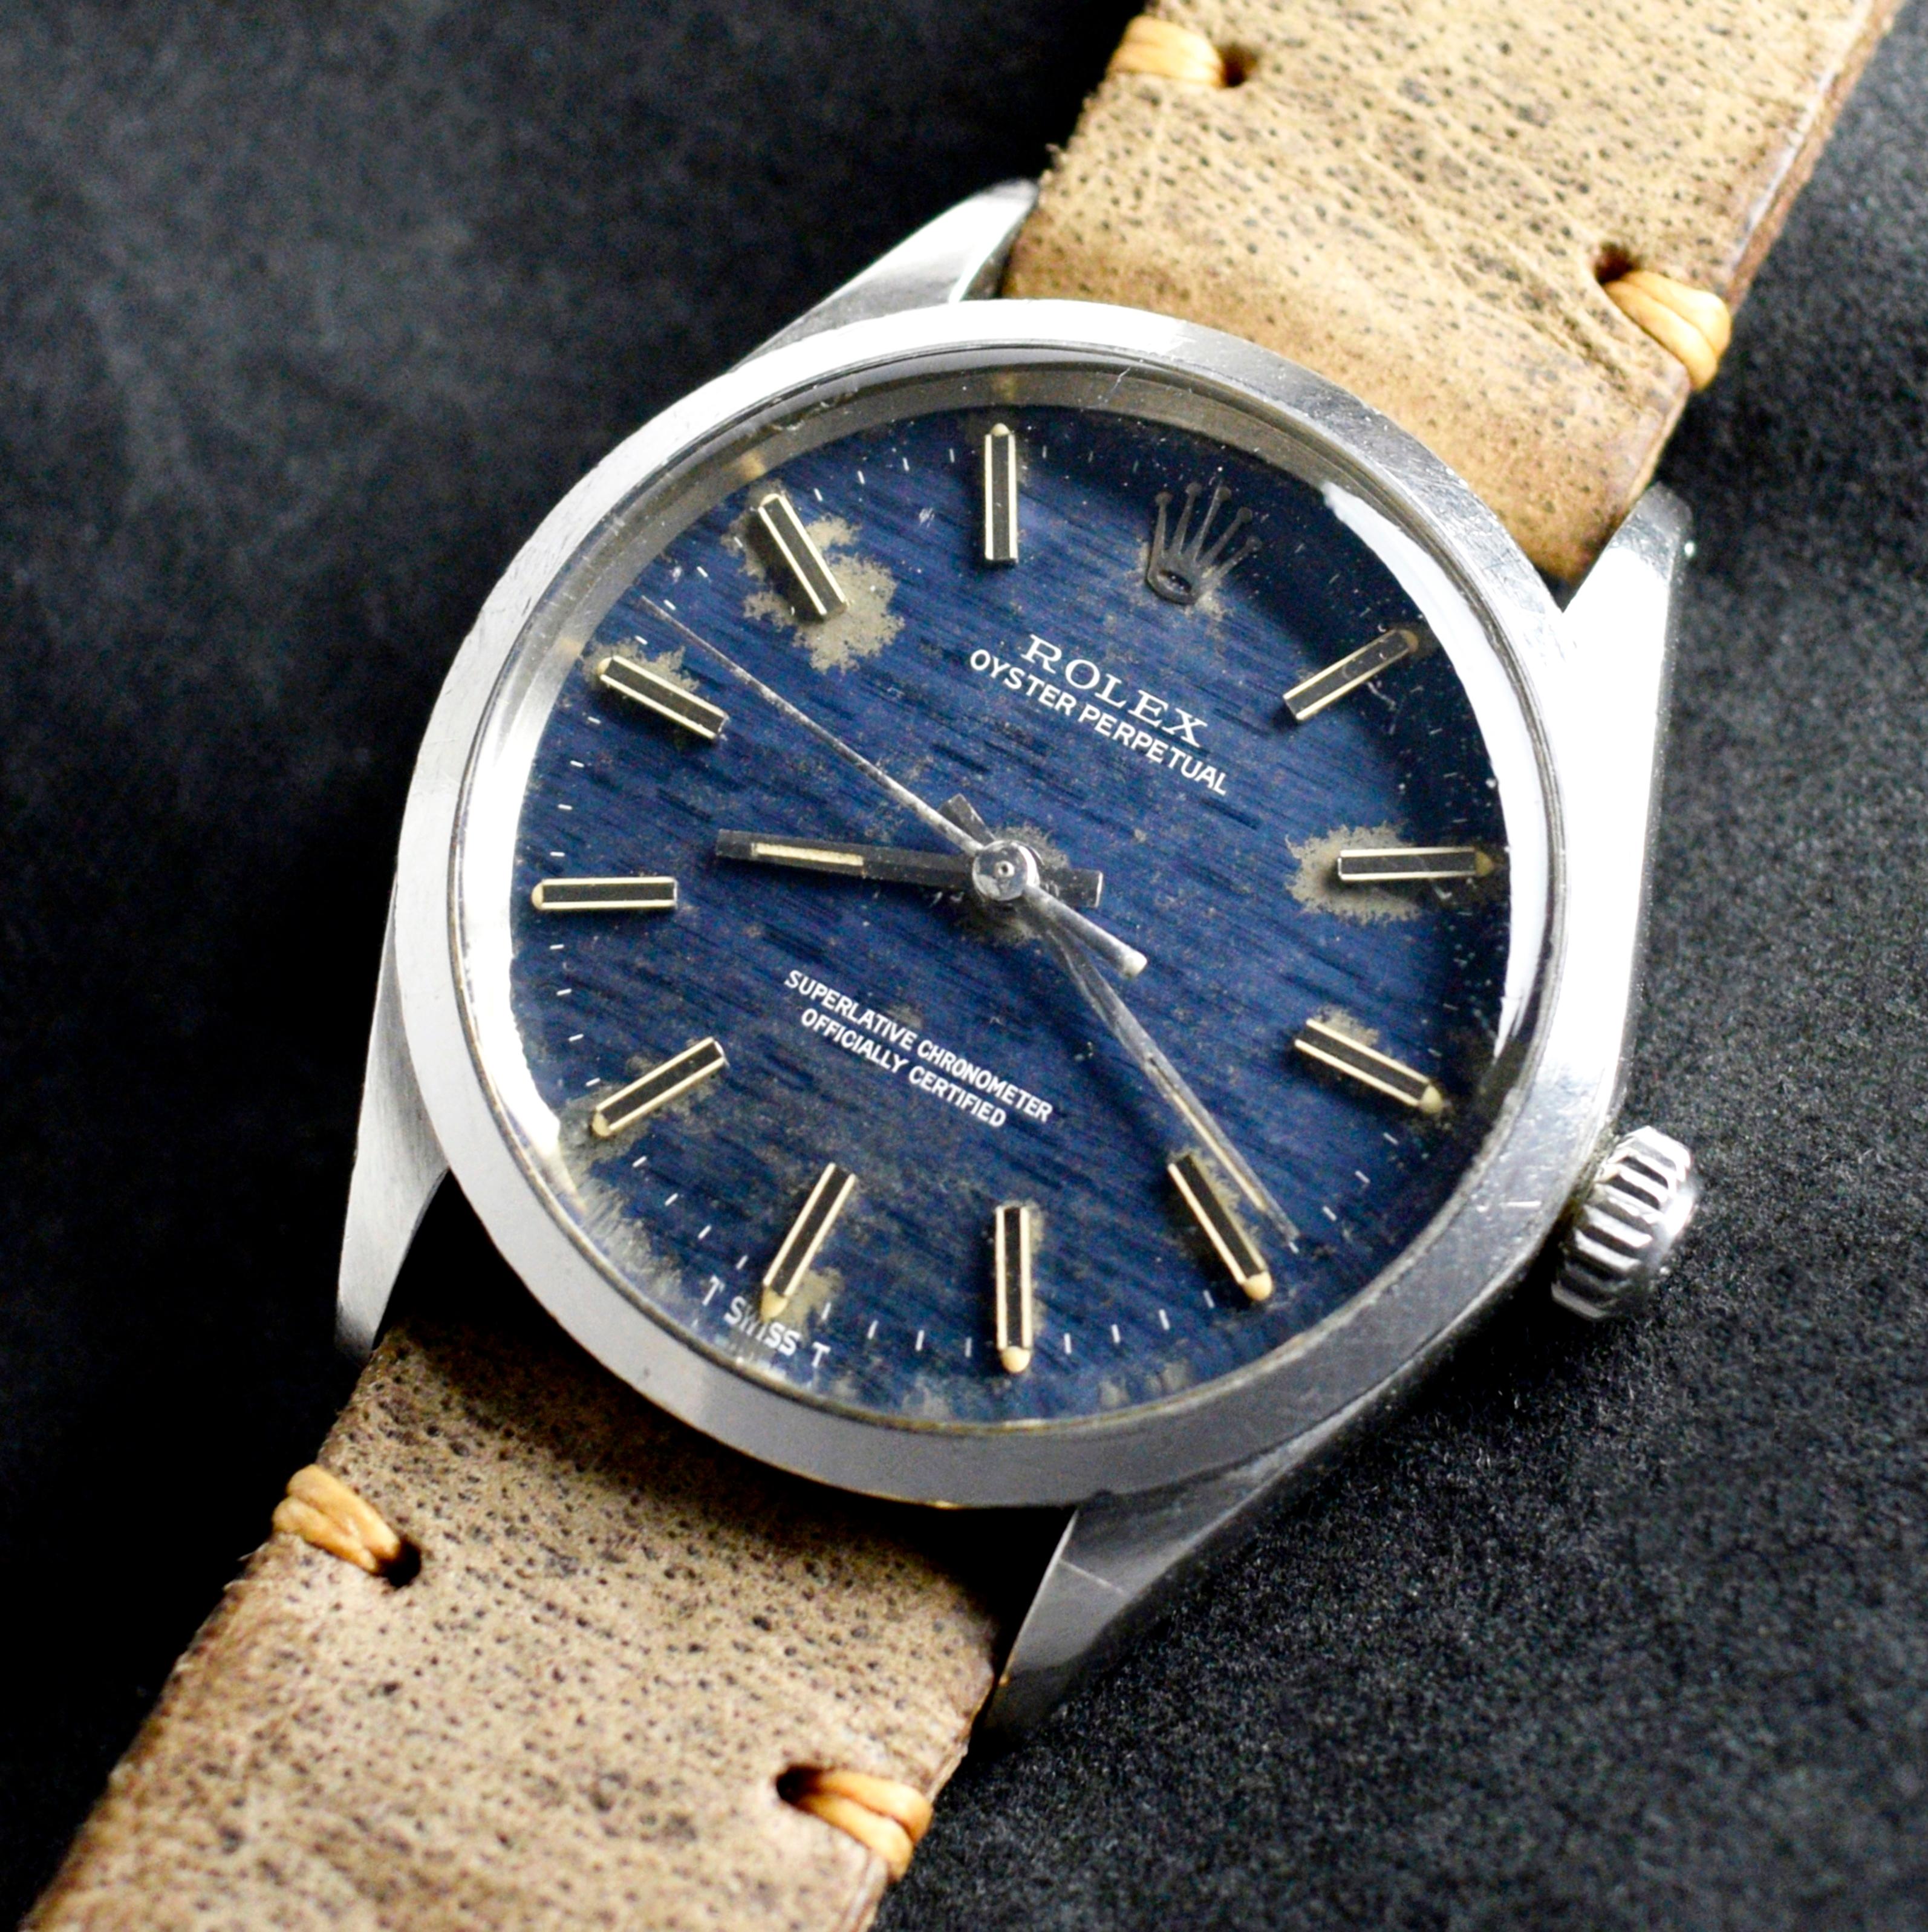 Brand: Vintage Rolex
Model: 1002
Year: 1972
Serial number: 35xxxxx
Reference: C03649

Case: 34mm without crown; Show sign of wear with slight polish from previous; inner case back stamped 1002

Dial: The dial was originally made in blue color and